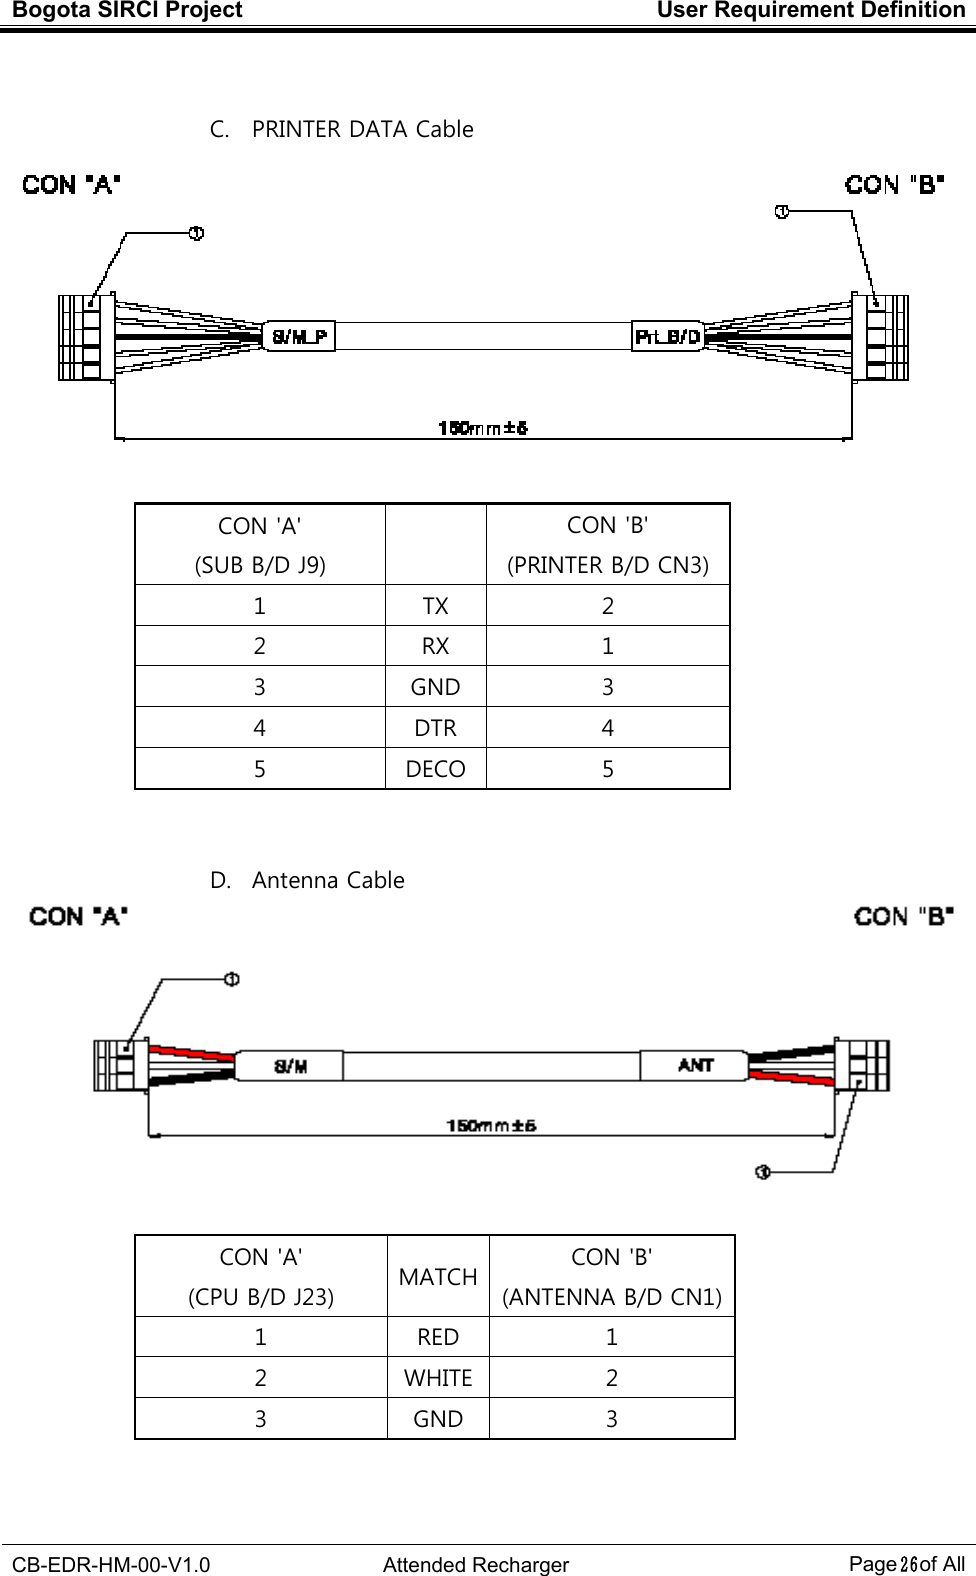 Bogota SIRCI Project  User Requirement Definition  CB-EDR-HM-00-V1.0  Attended Recharger Page２６ of All  C. PRINTER DATA Cable    CON &apos;A&apos; (SUB B/D J9)   CON &apos;B&apos; (PRINTER B/D CN3) 1  TX  2 2  RX  1 3  GND  3 4  DTR  4 5  DECO  5  D. Antenna Cable CON &apos;A&apos; (CPU B/D J23)  MATCH CON &apos;B&apos; (ANTENNA B/D CN1) 1  RED  1 2  WHITE 2 3  GND  3 